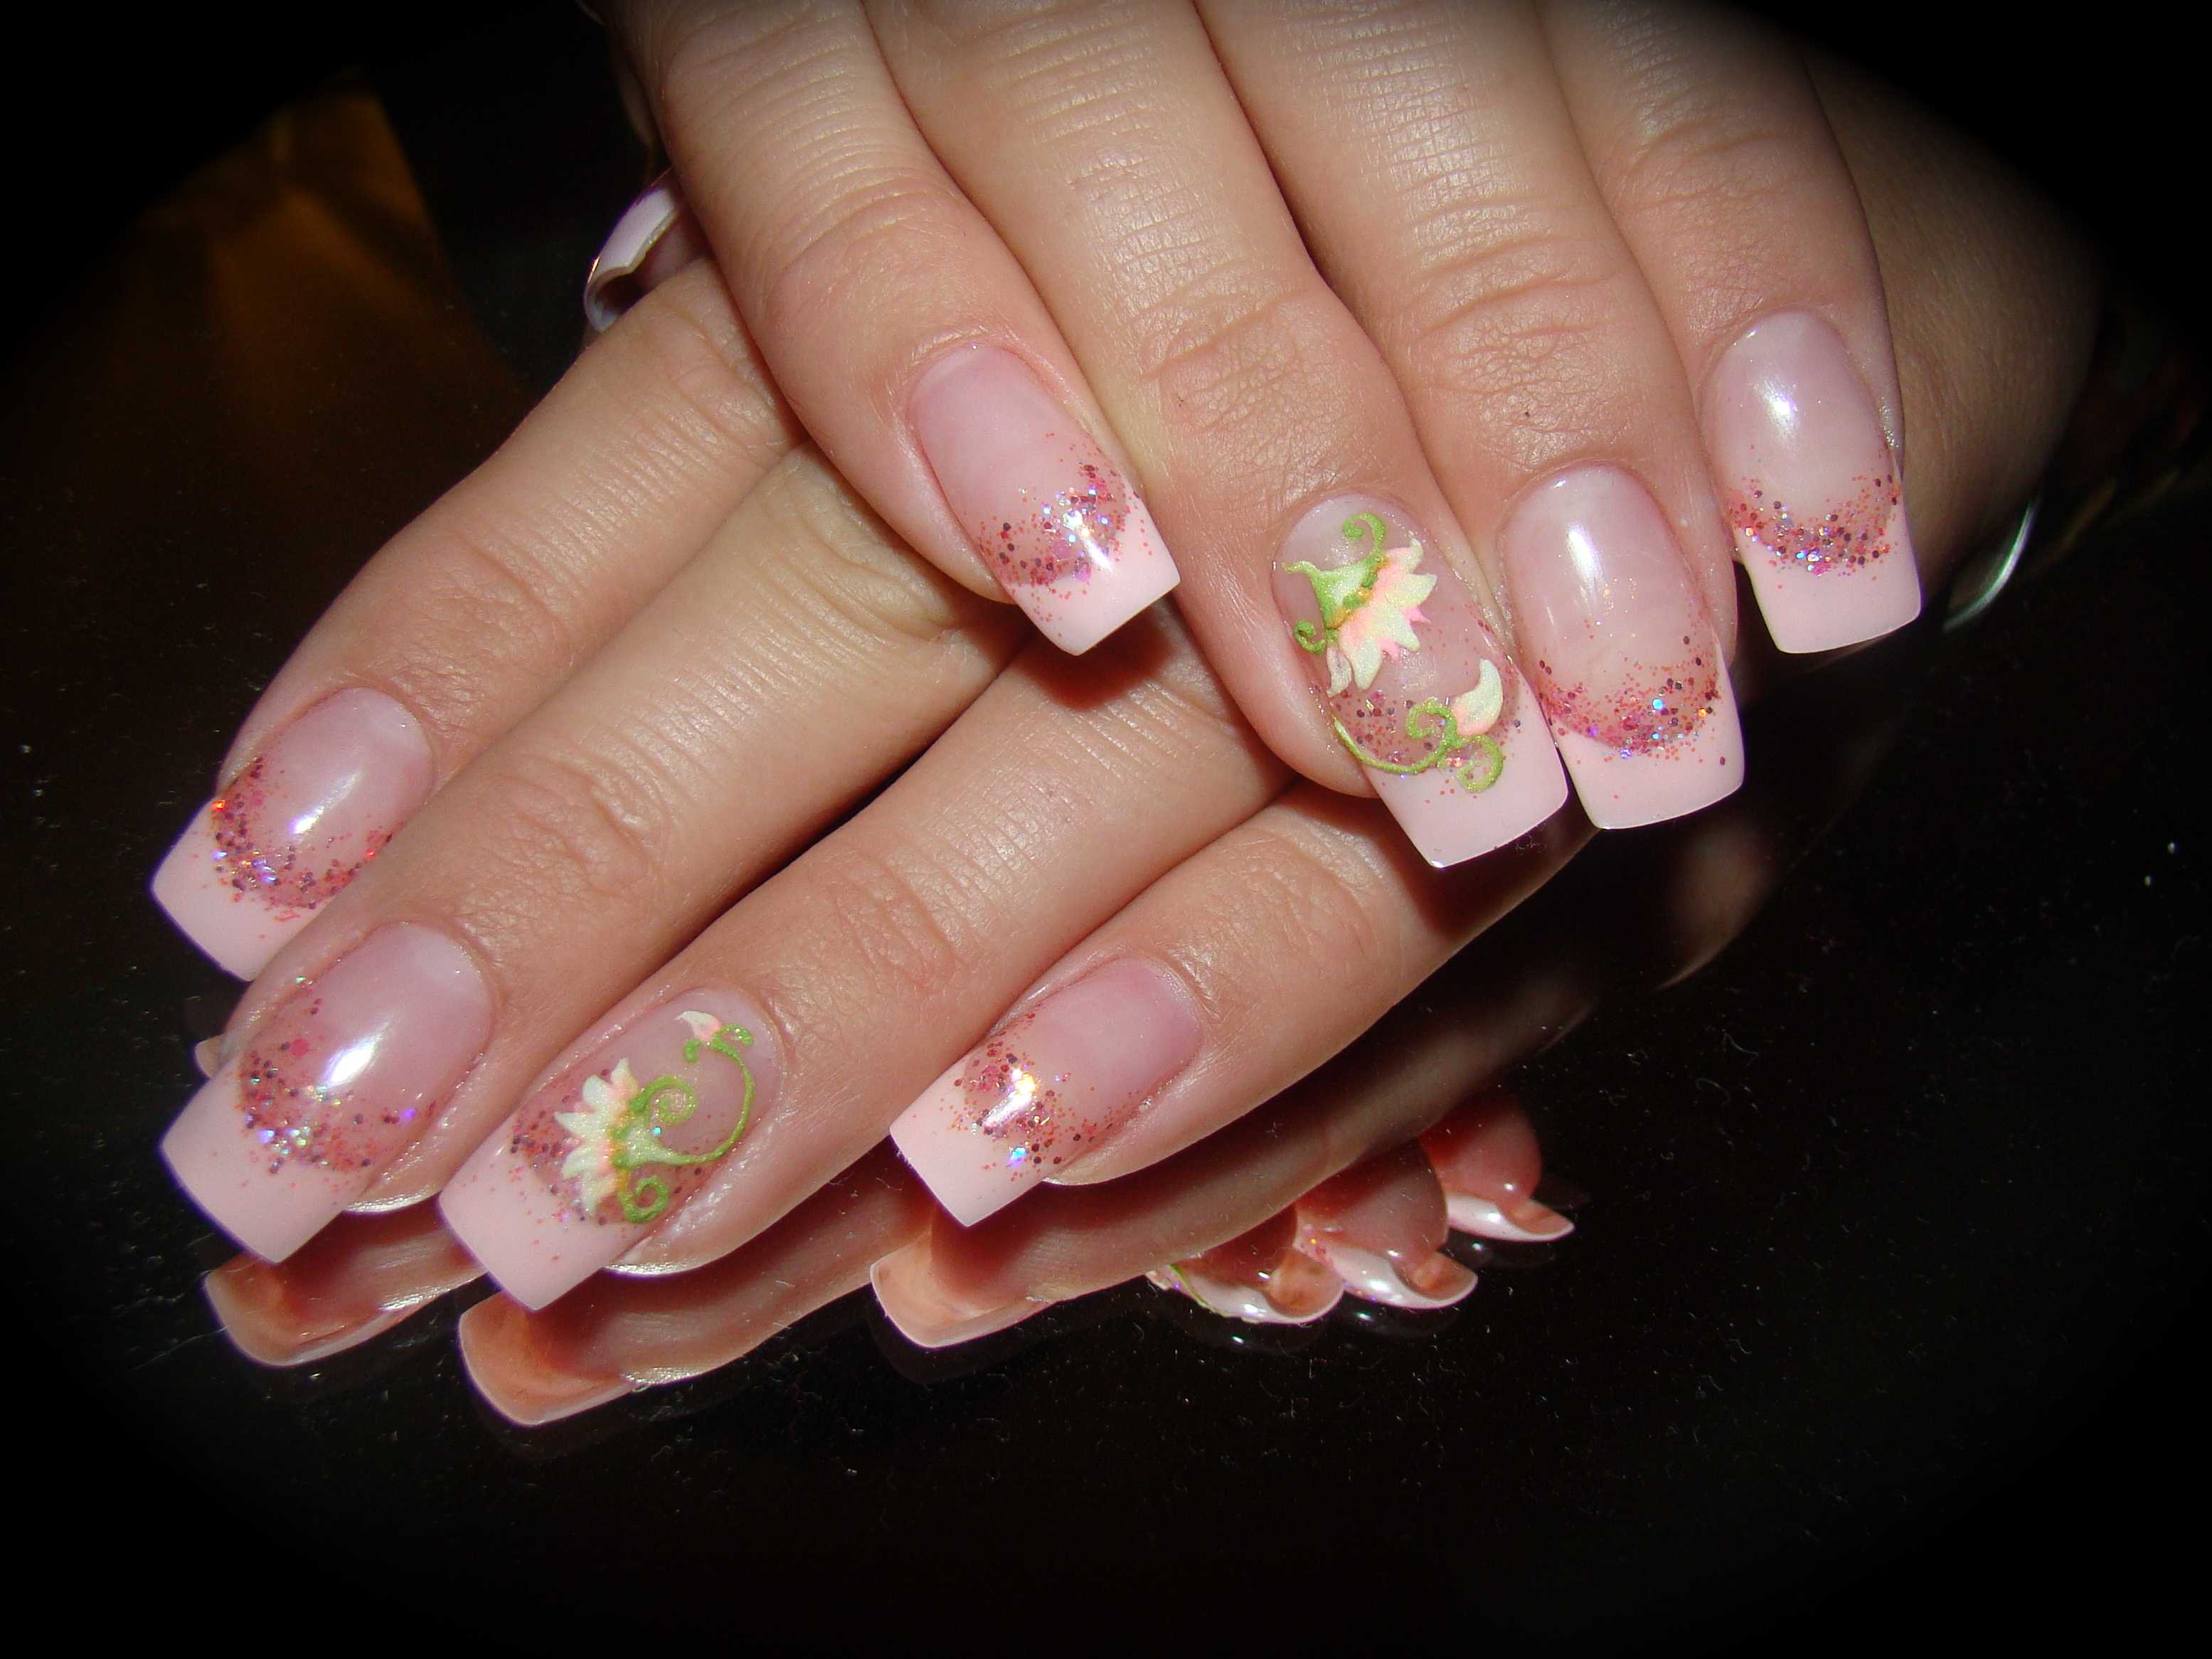 2. Floral Acrylic Nail Art - wide 4